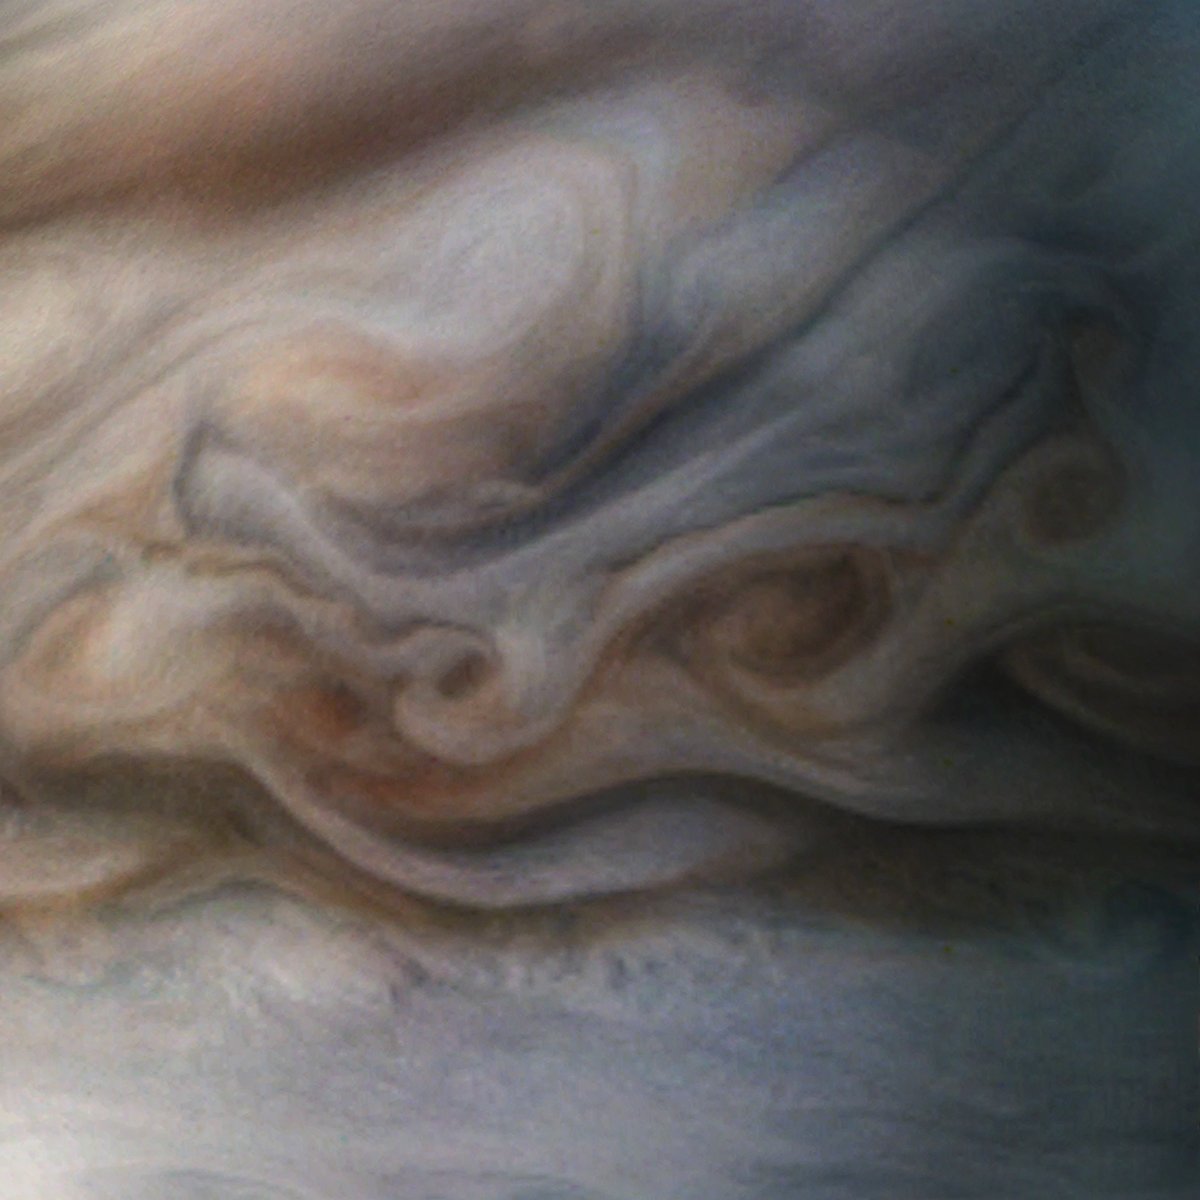 and-heres-a-close-up-of-jupiters-swirlin